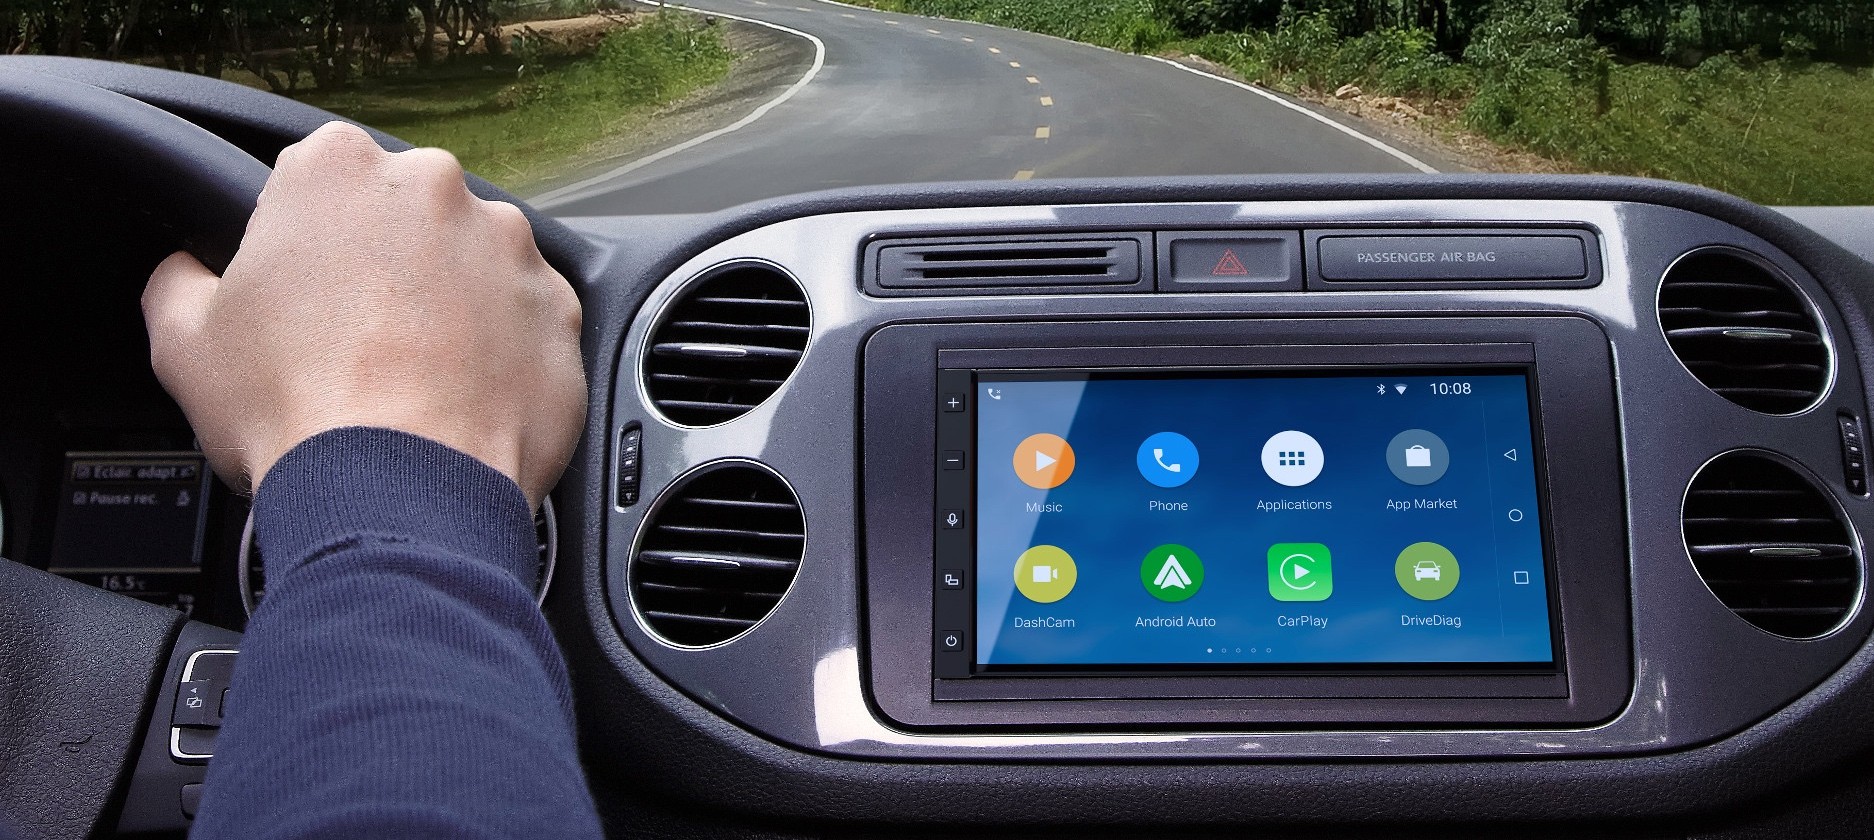 android auto vs apple carplay reviews are kind of fun_5